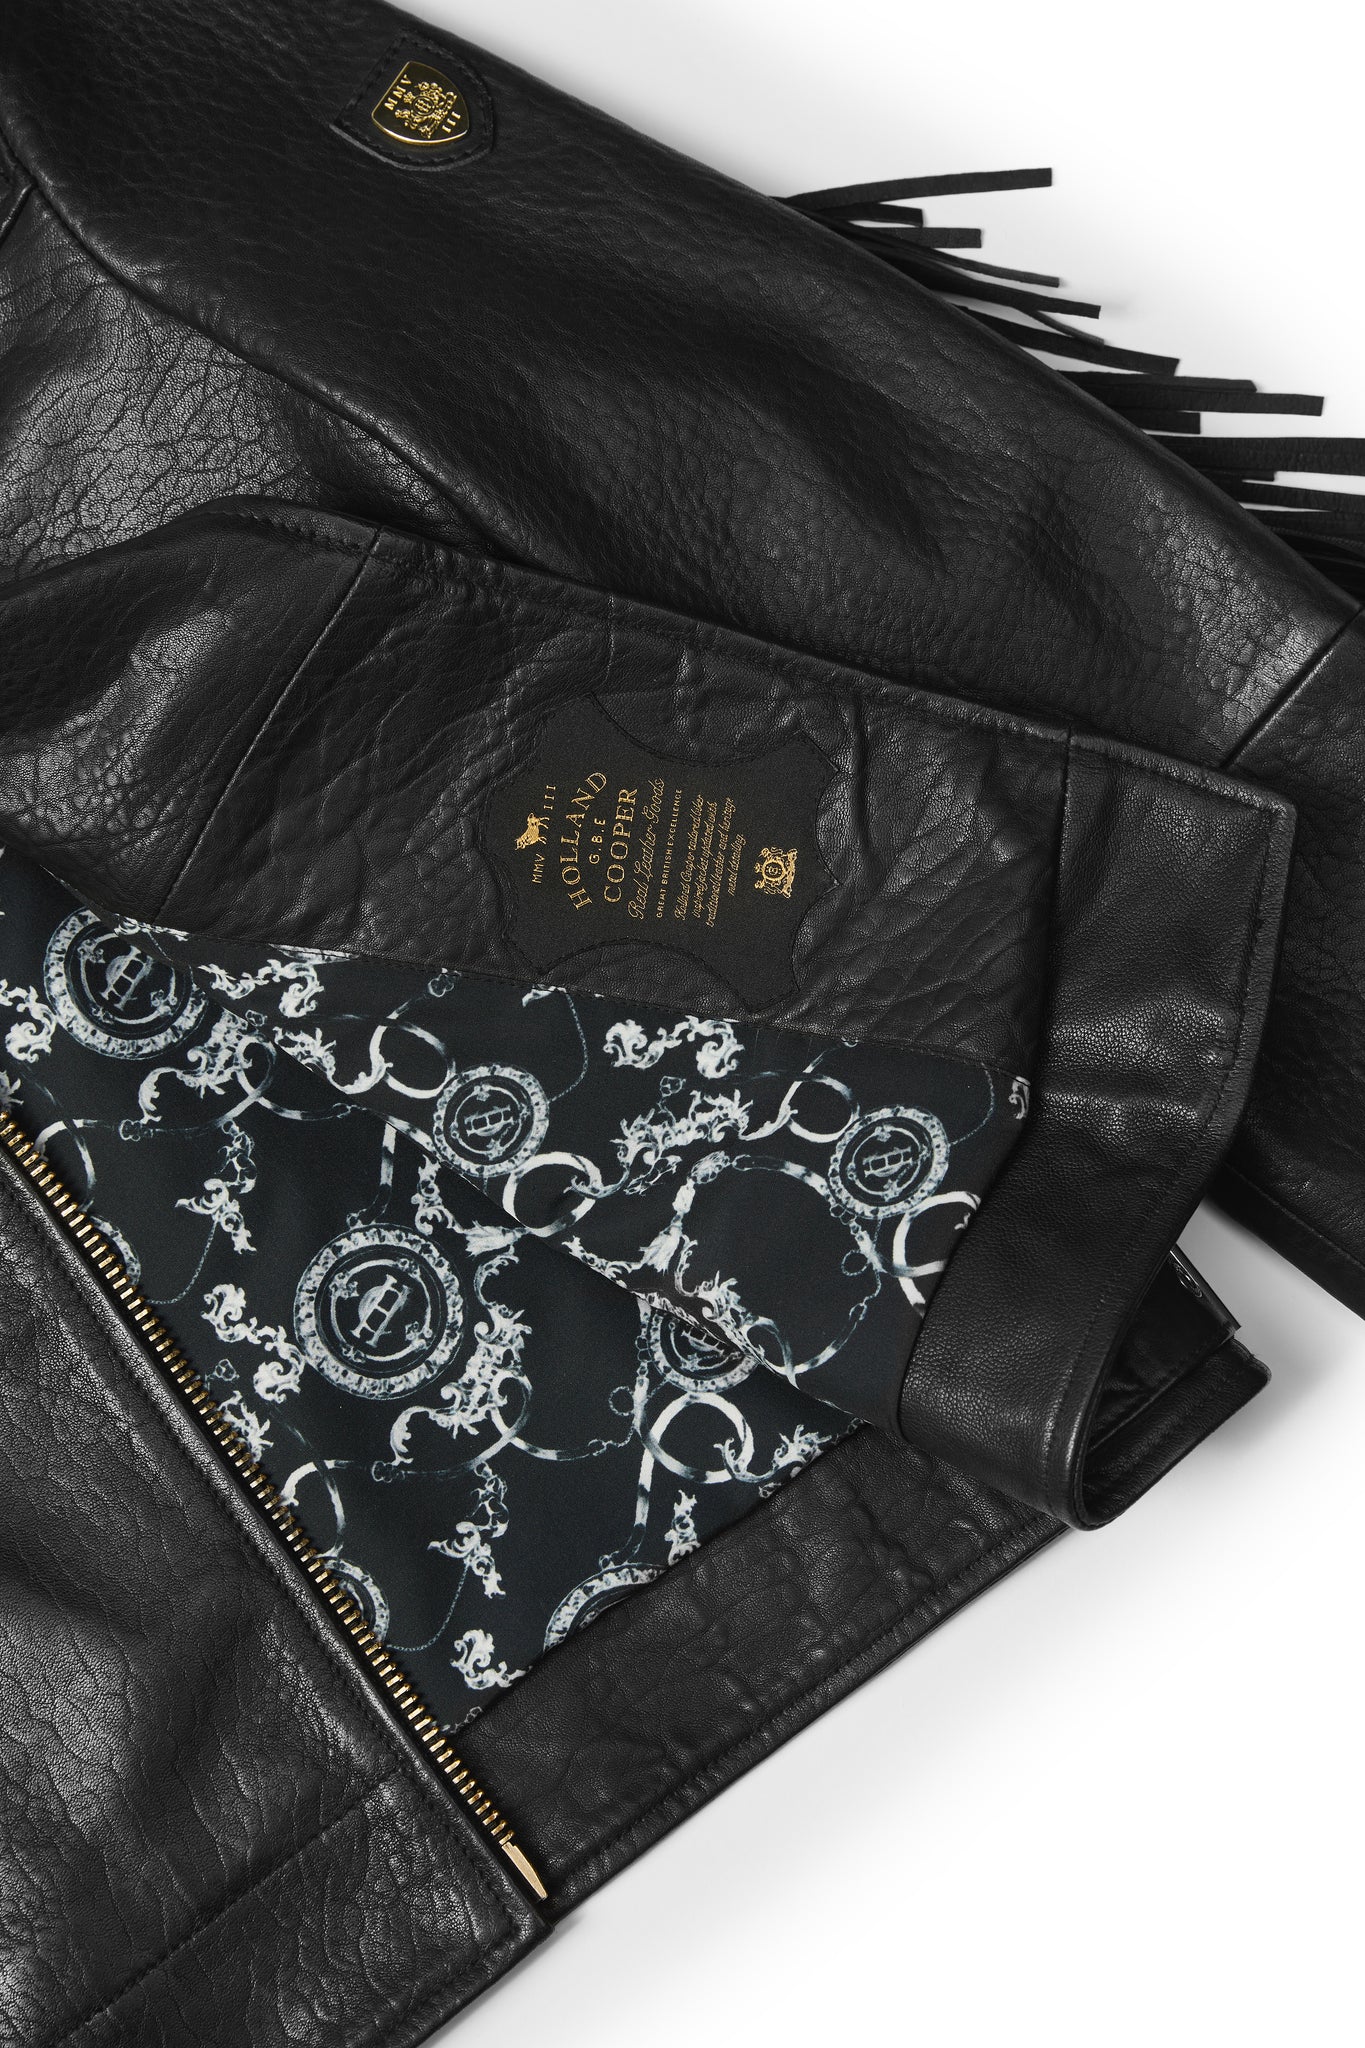 lining detail on womens leather biker jacket in black with fringing along the back and sleeves detailed with golf zips and small shield badge on arm